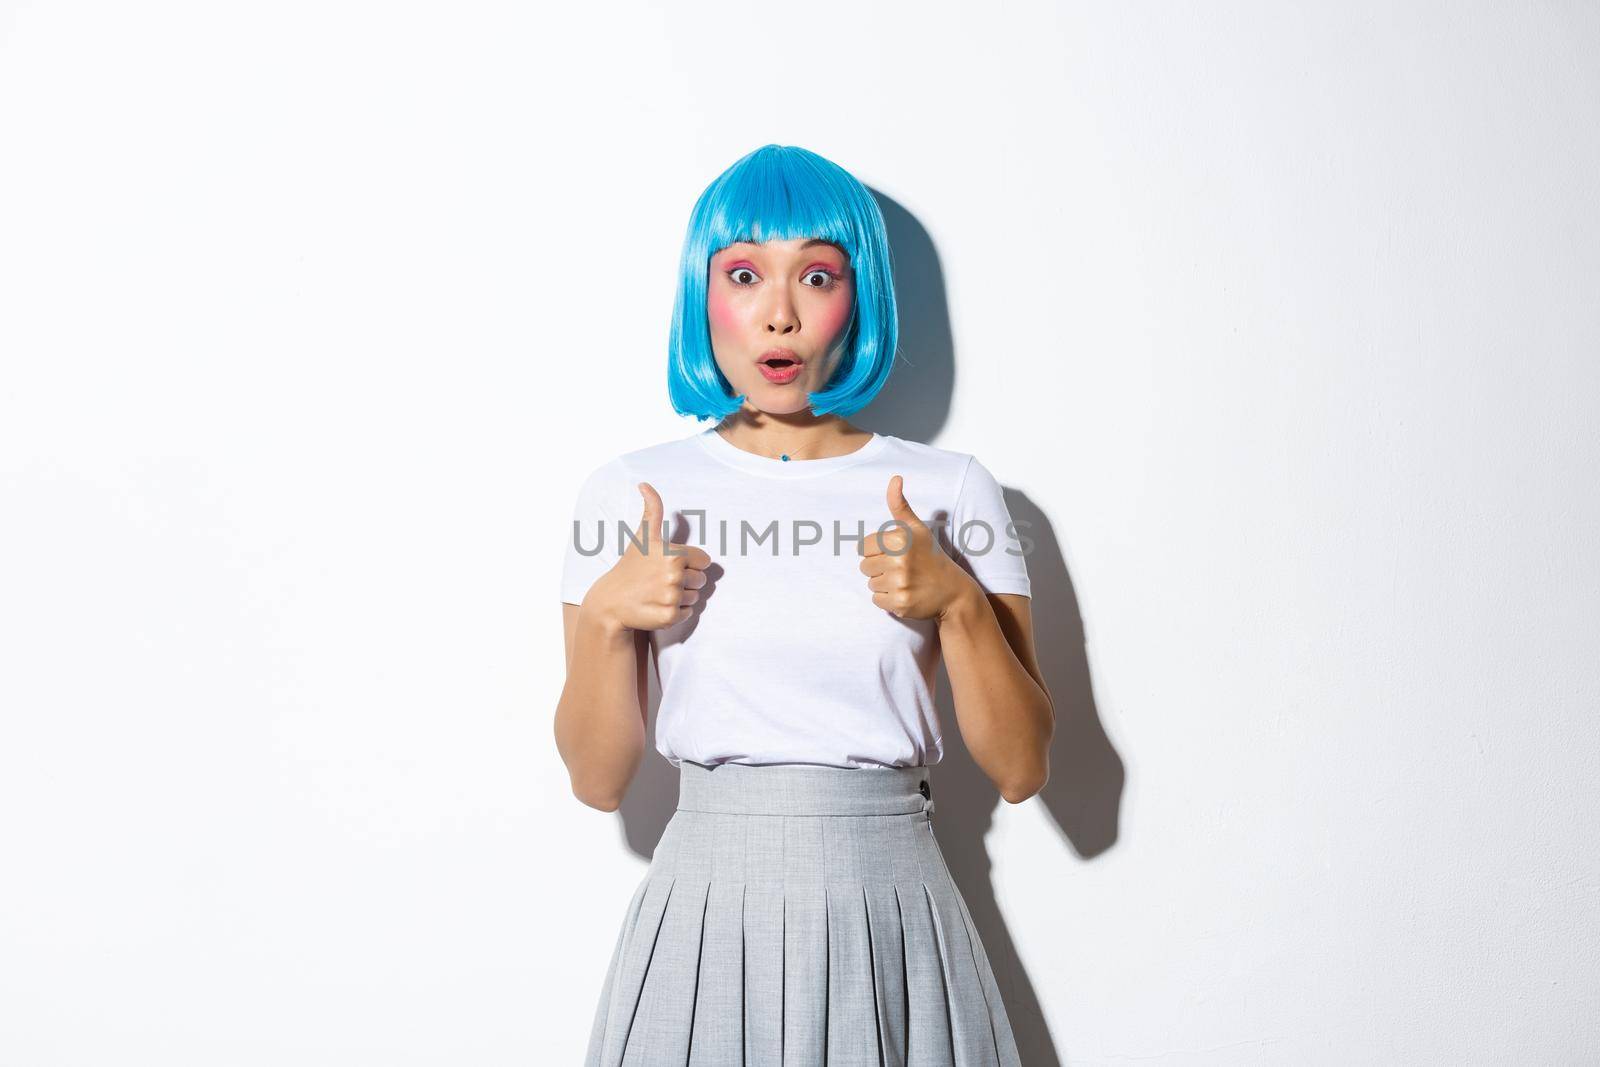 Surprised asian girl in blue wig gasping amazed, showing thumbs-up in approval, standing over white background.